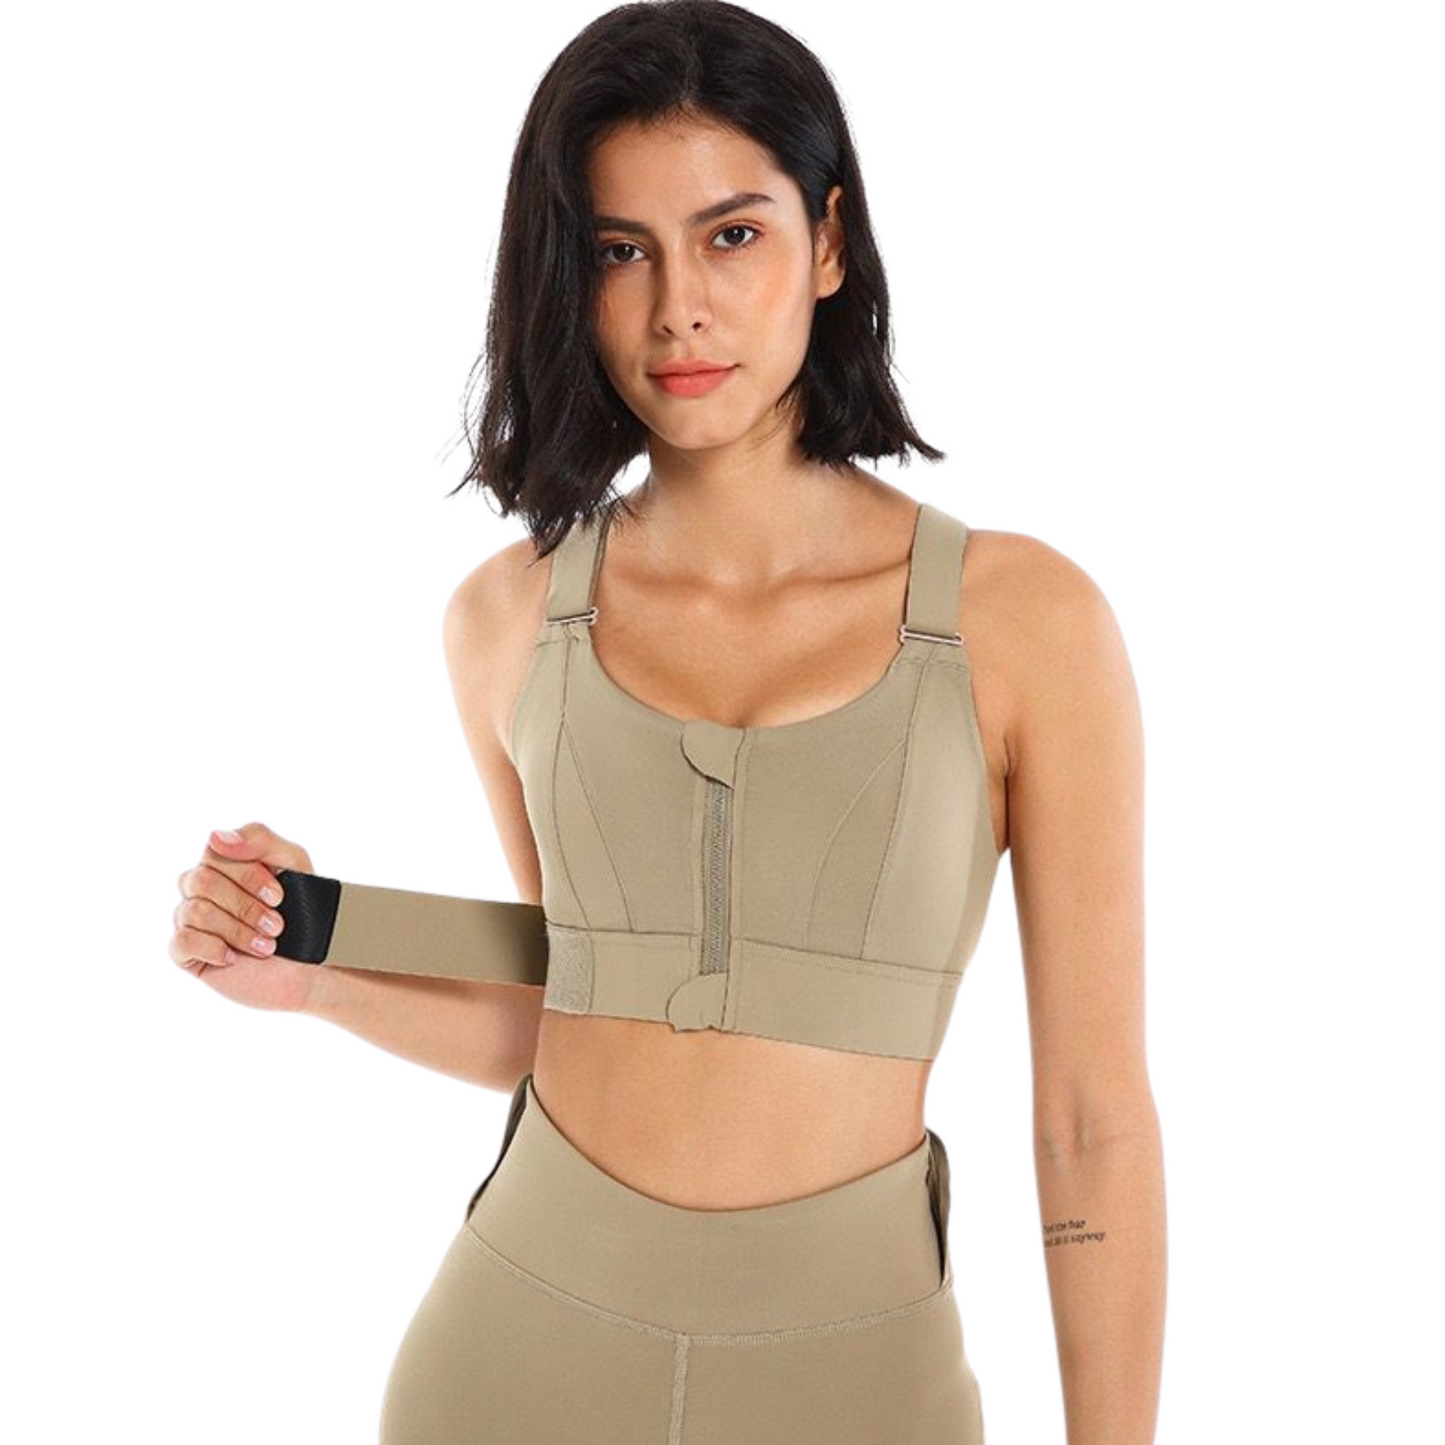 Female adjusting a caramel high impact sport bra on her body from vibras activewear